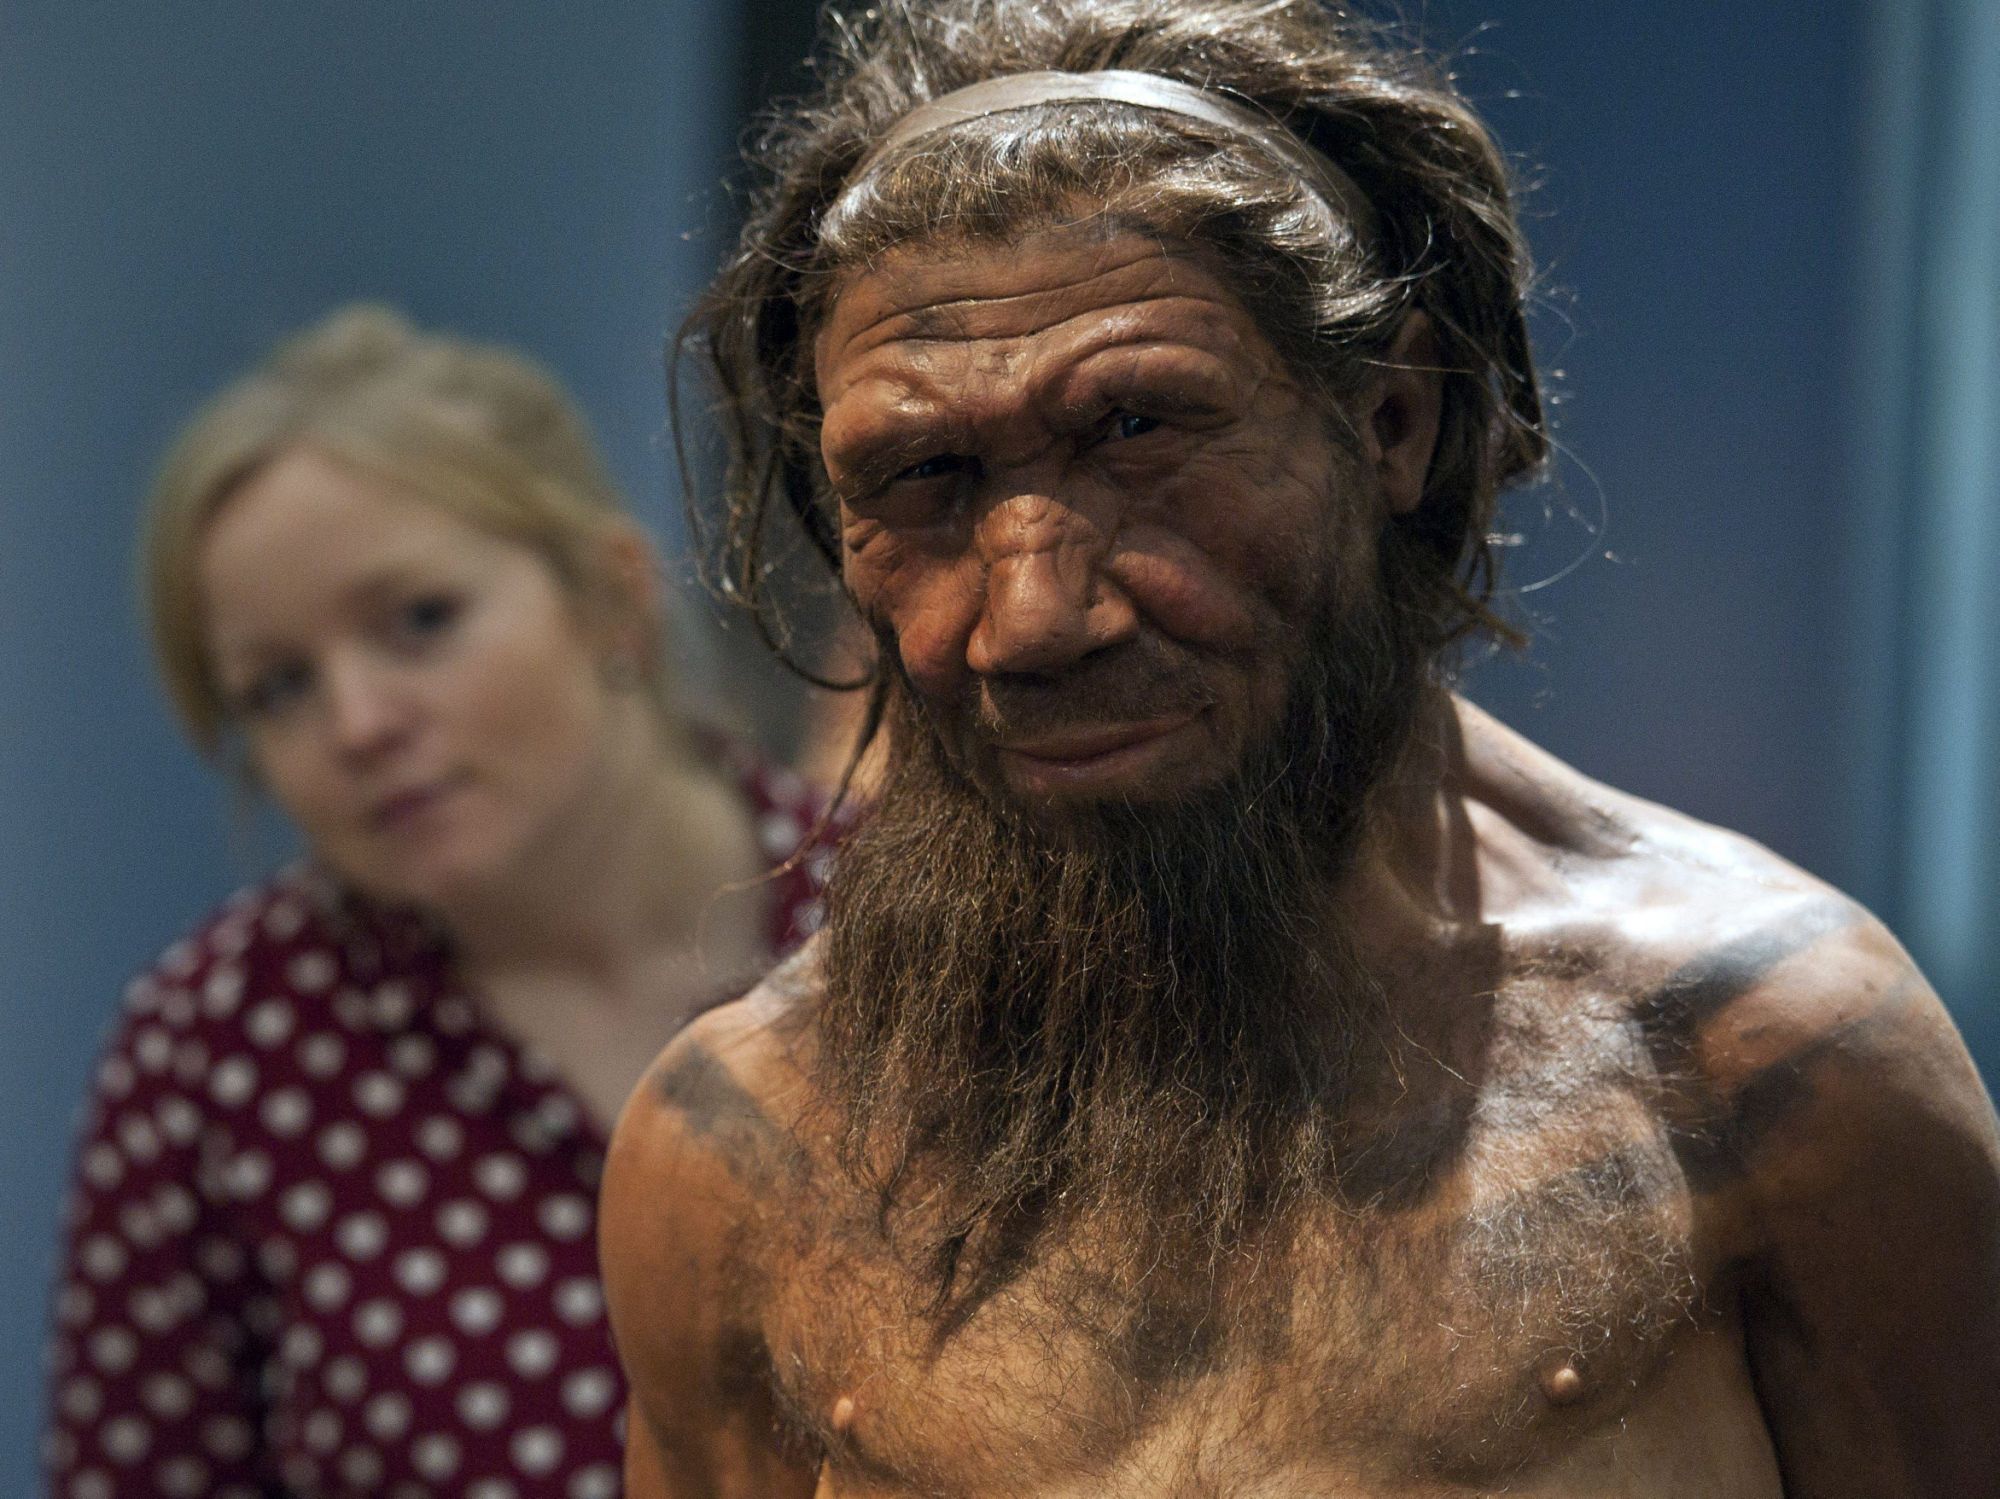 A genetic advantage inherited from Neanderthals could give some people a 22% lower risk of severe COVID-19